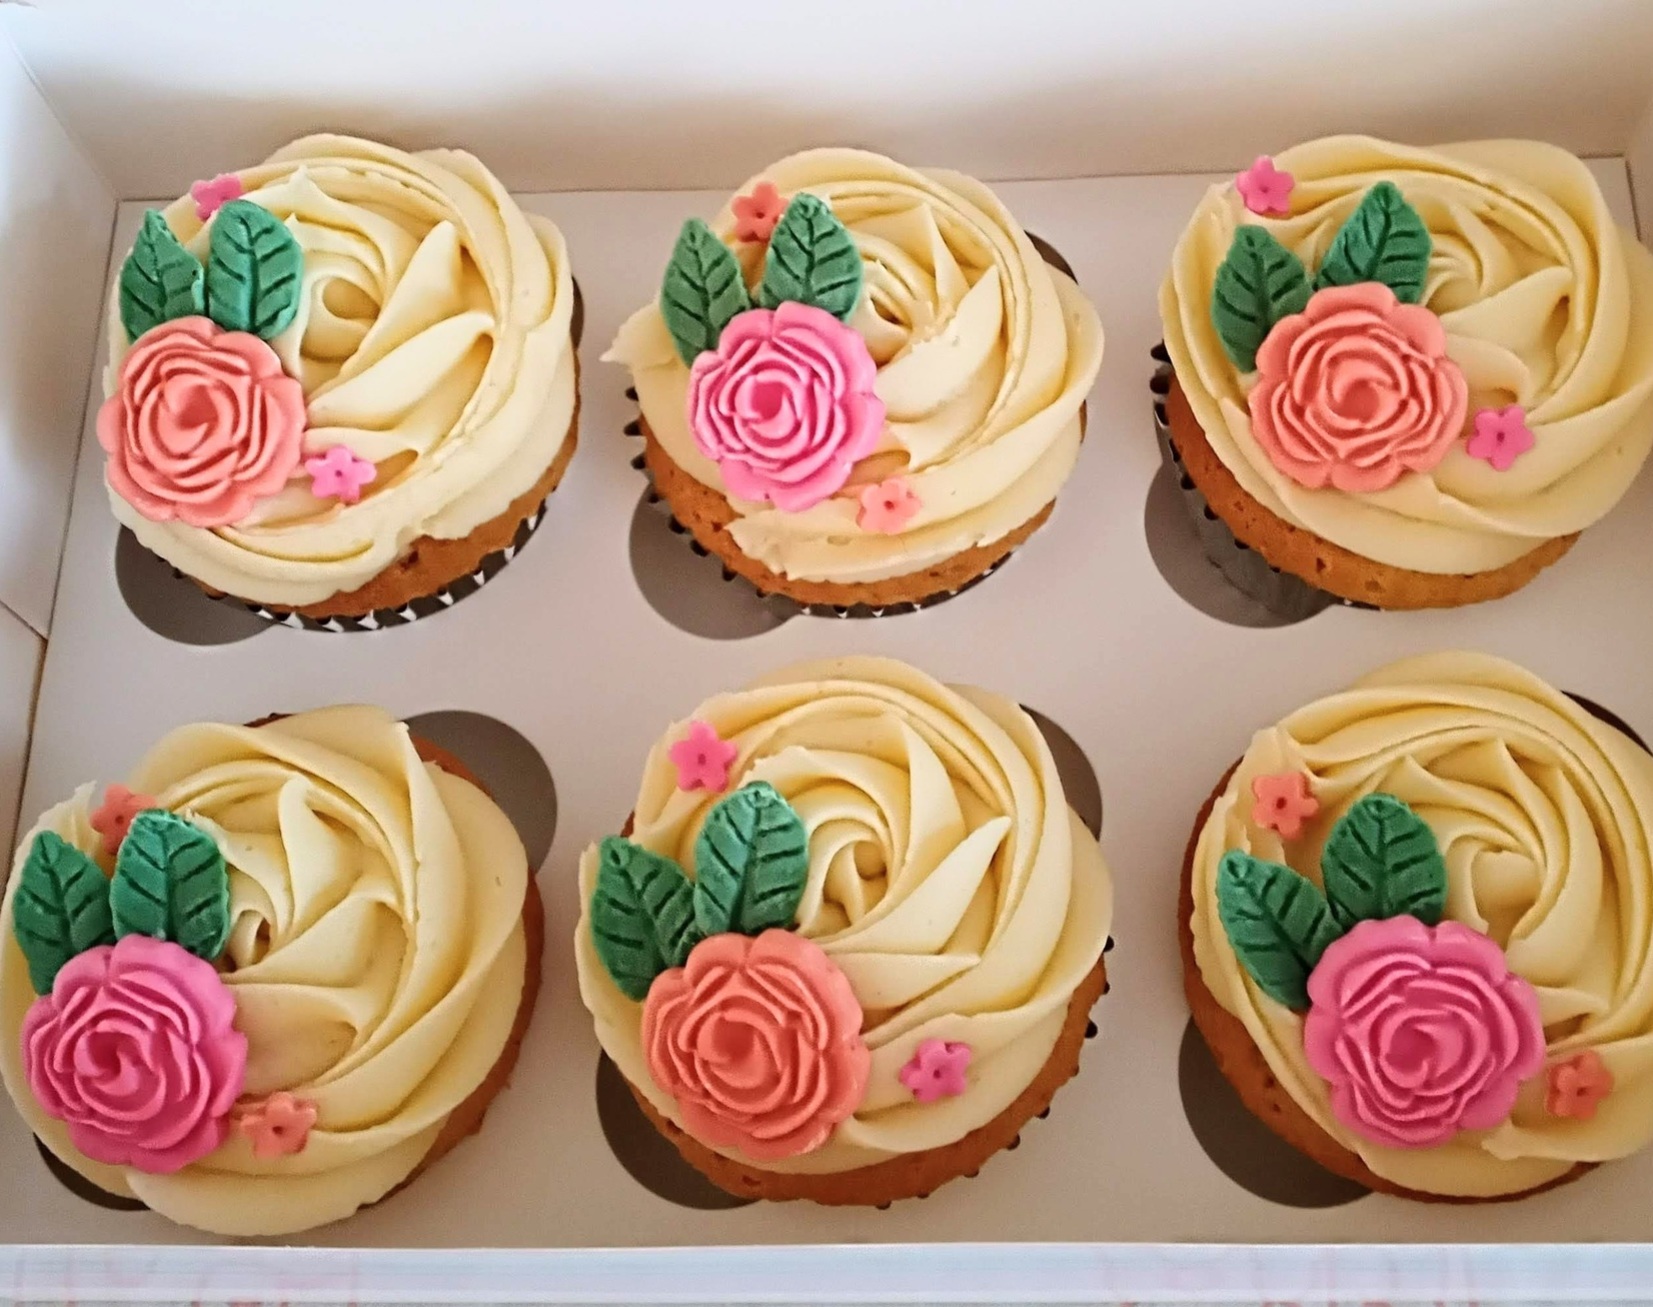 Vanilla cupcakes topped with sugar flowers